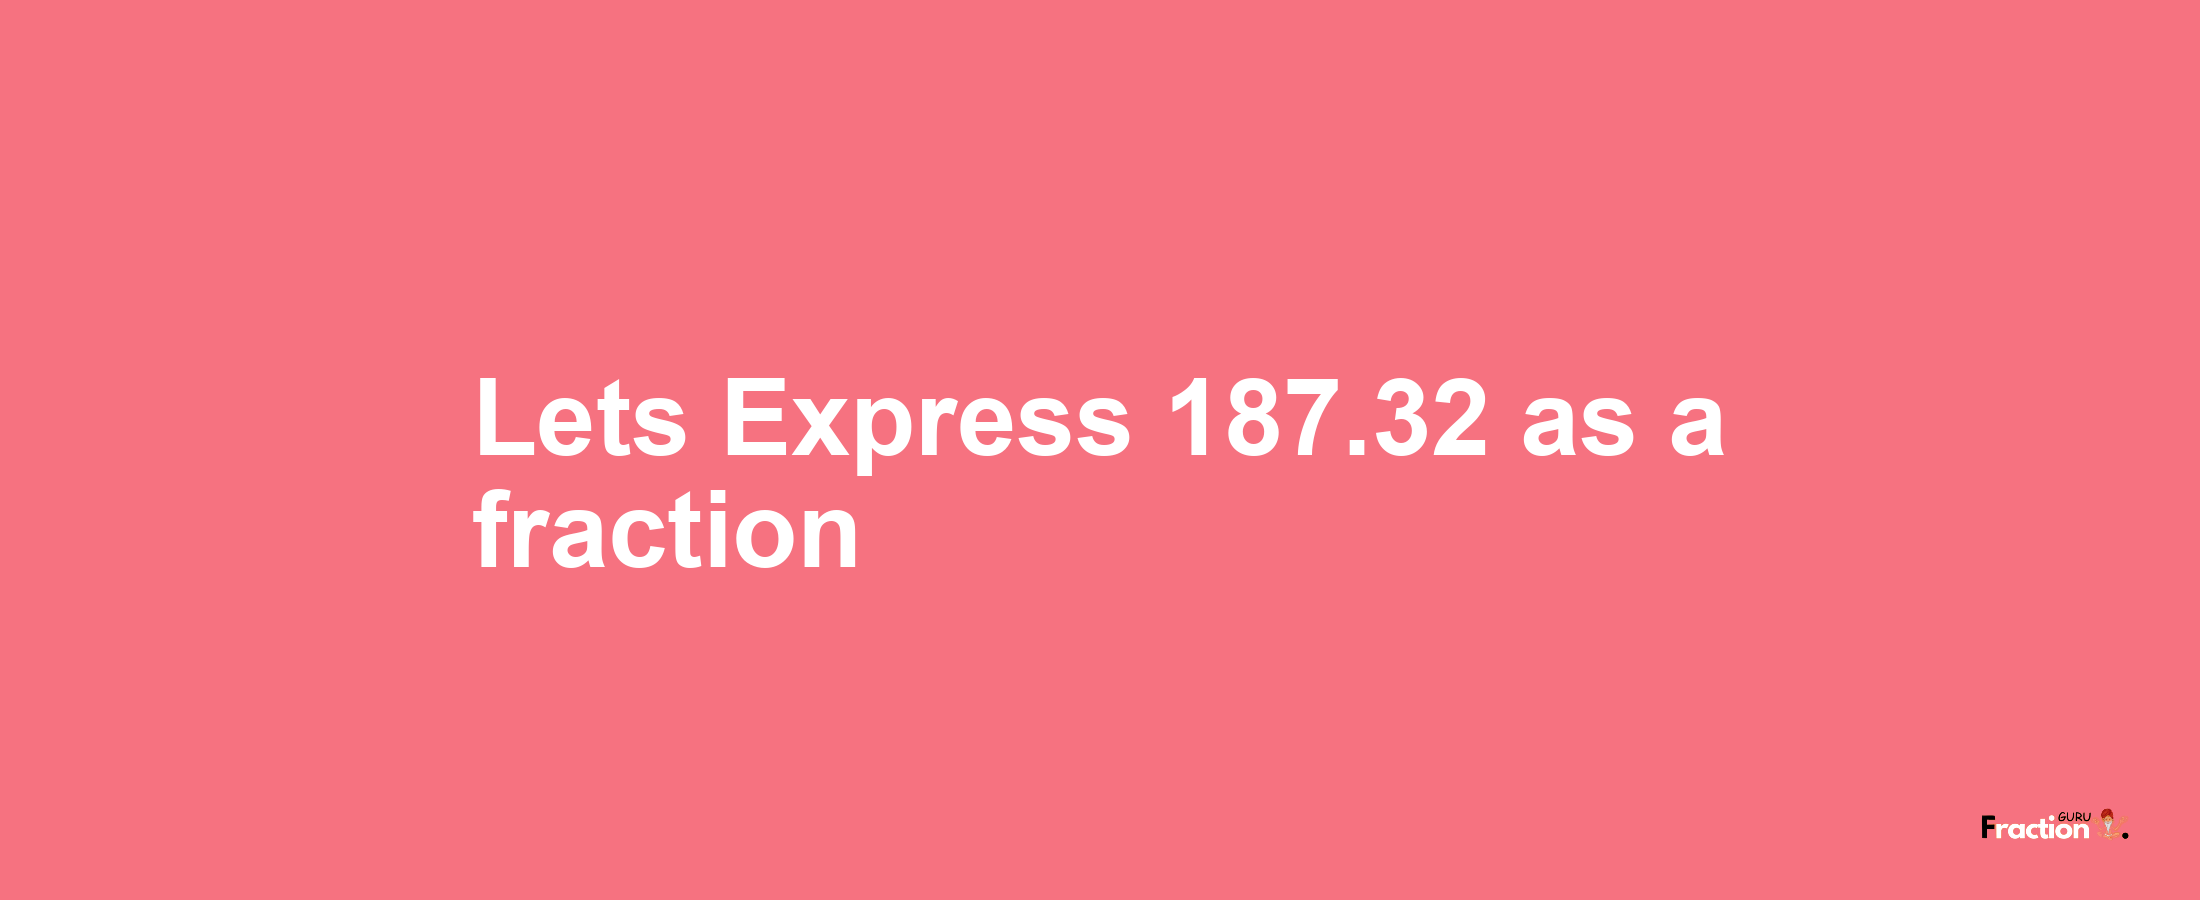 Lets Express 187.32 as afraction